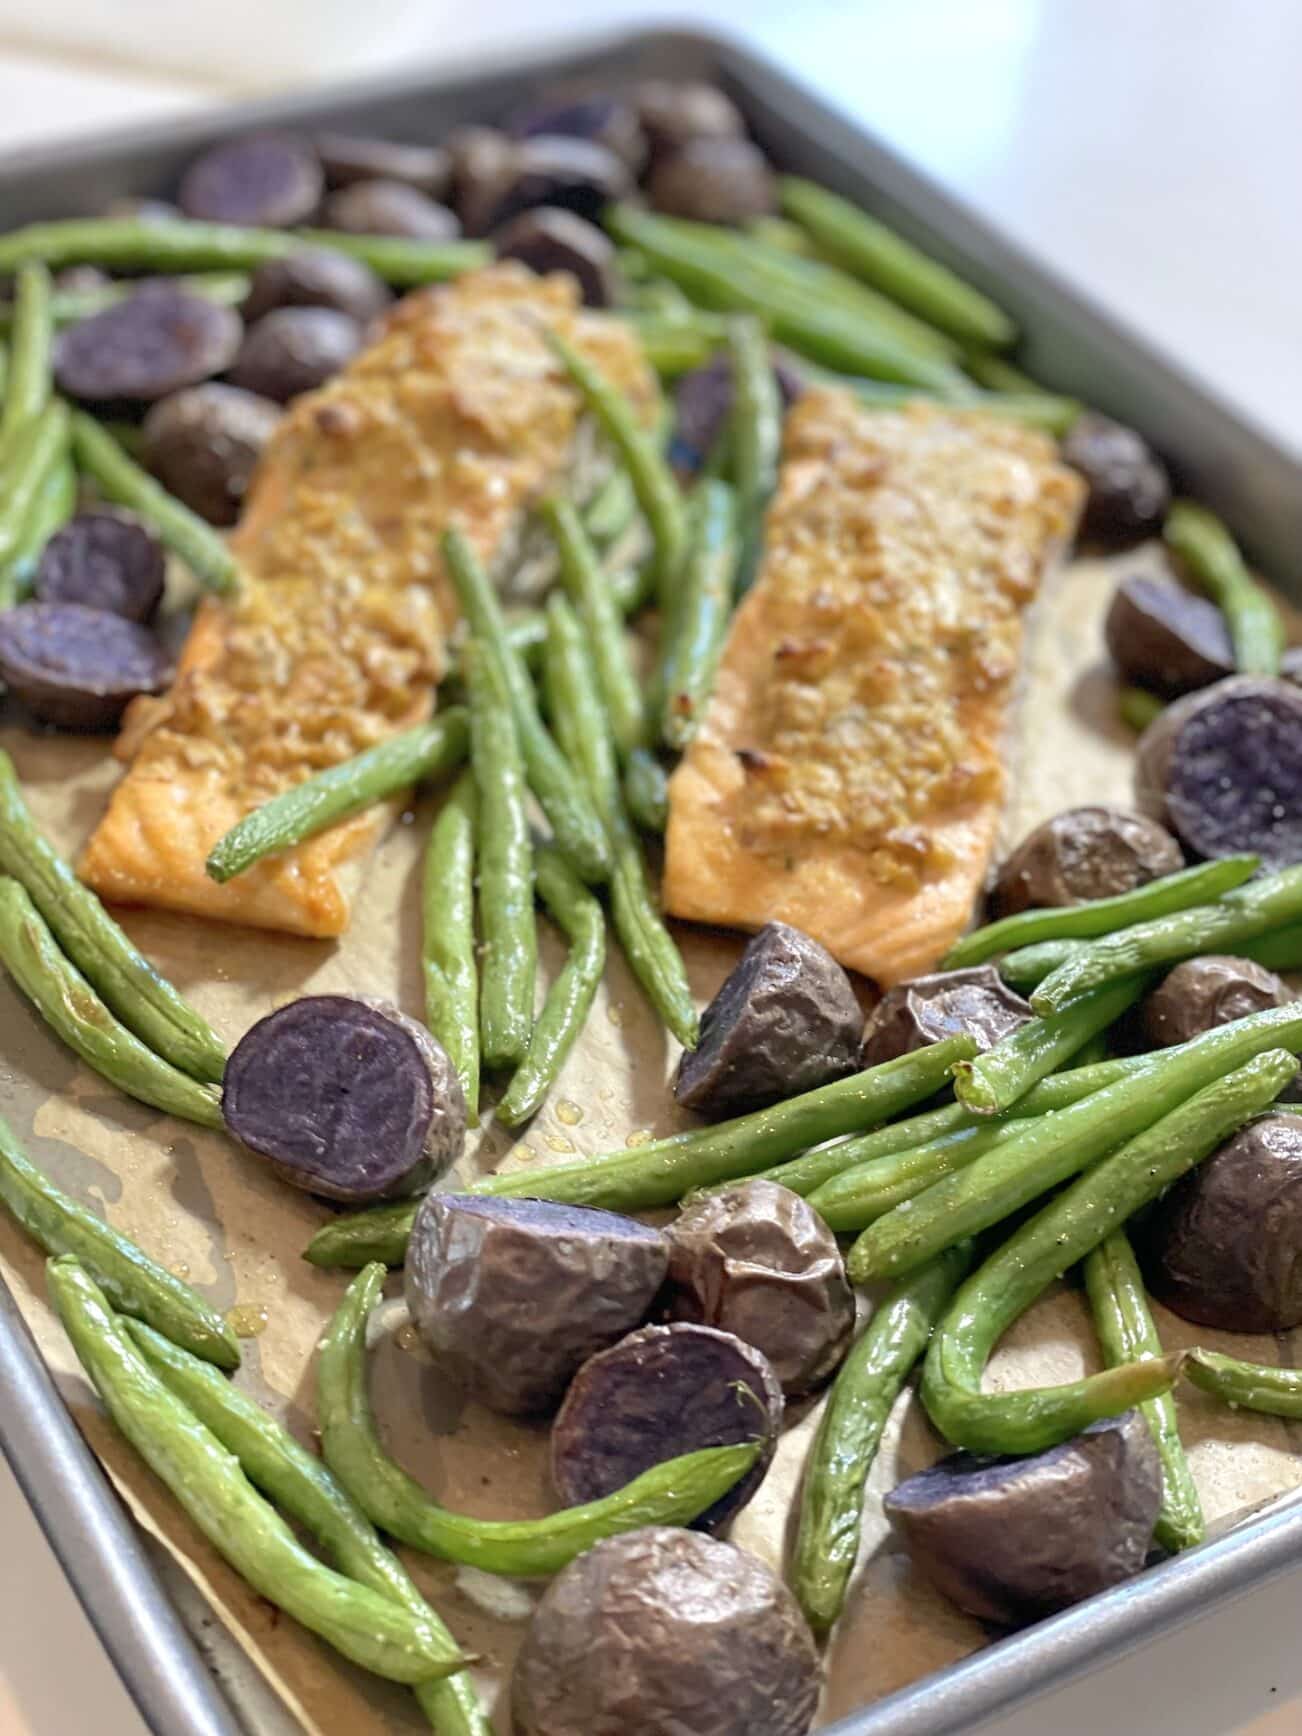 Sheet Pan Salmon With Purple Potatoes and String Beans